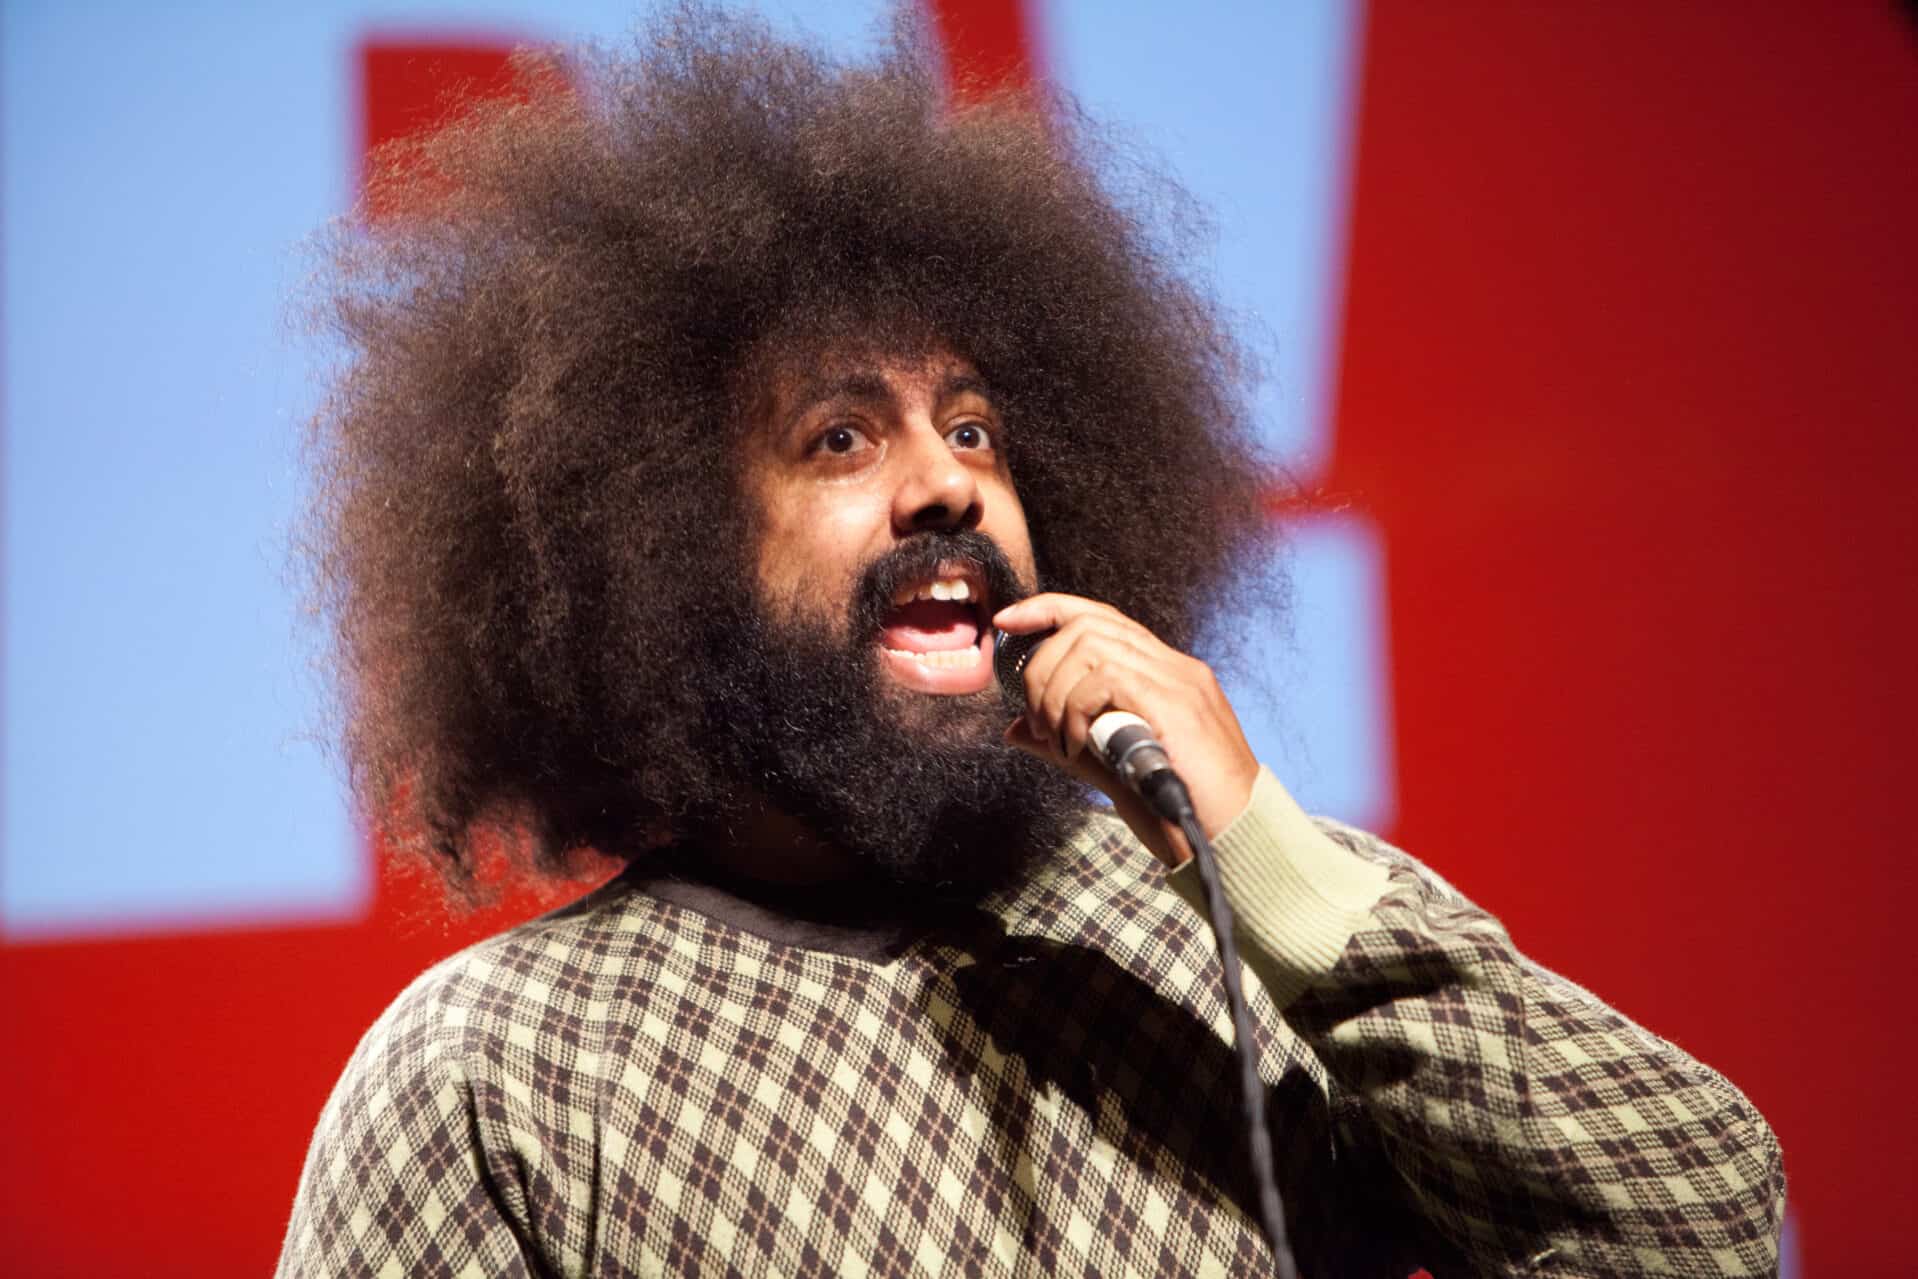 Reggie Watts performs comedy on stage